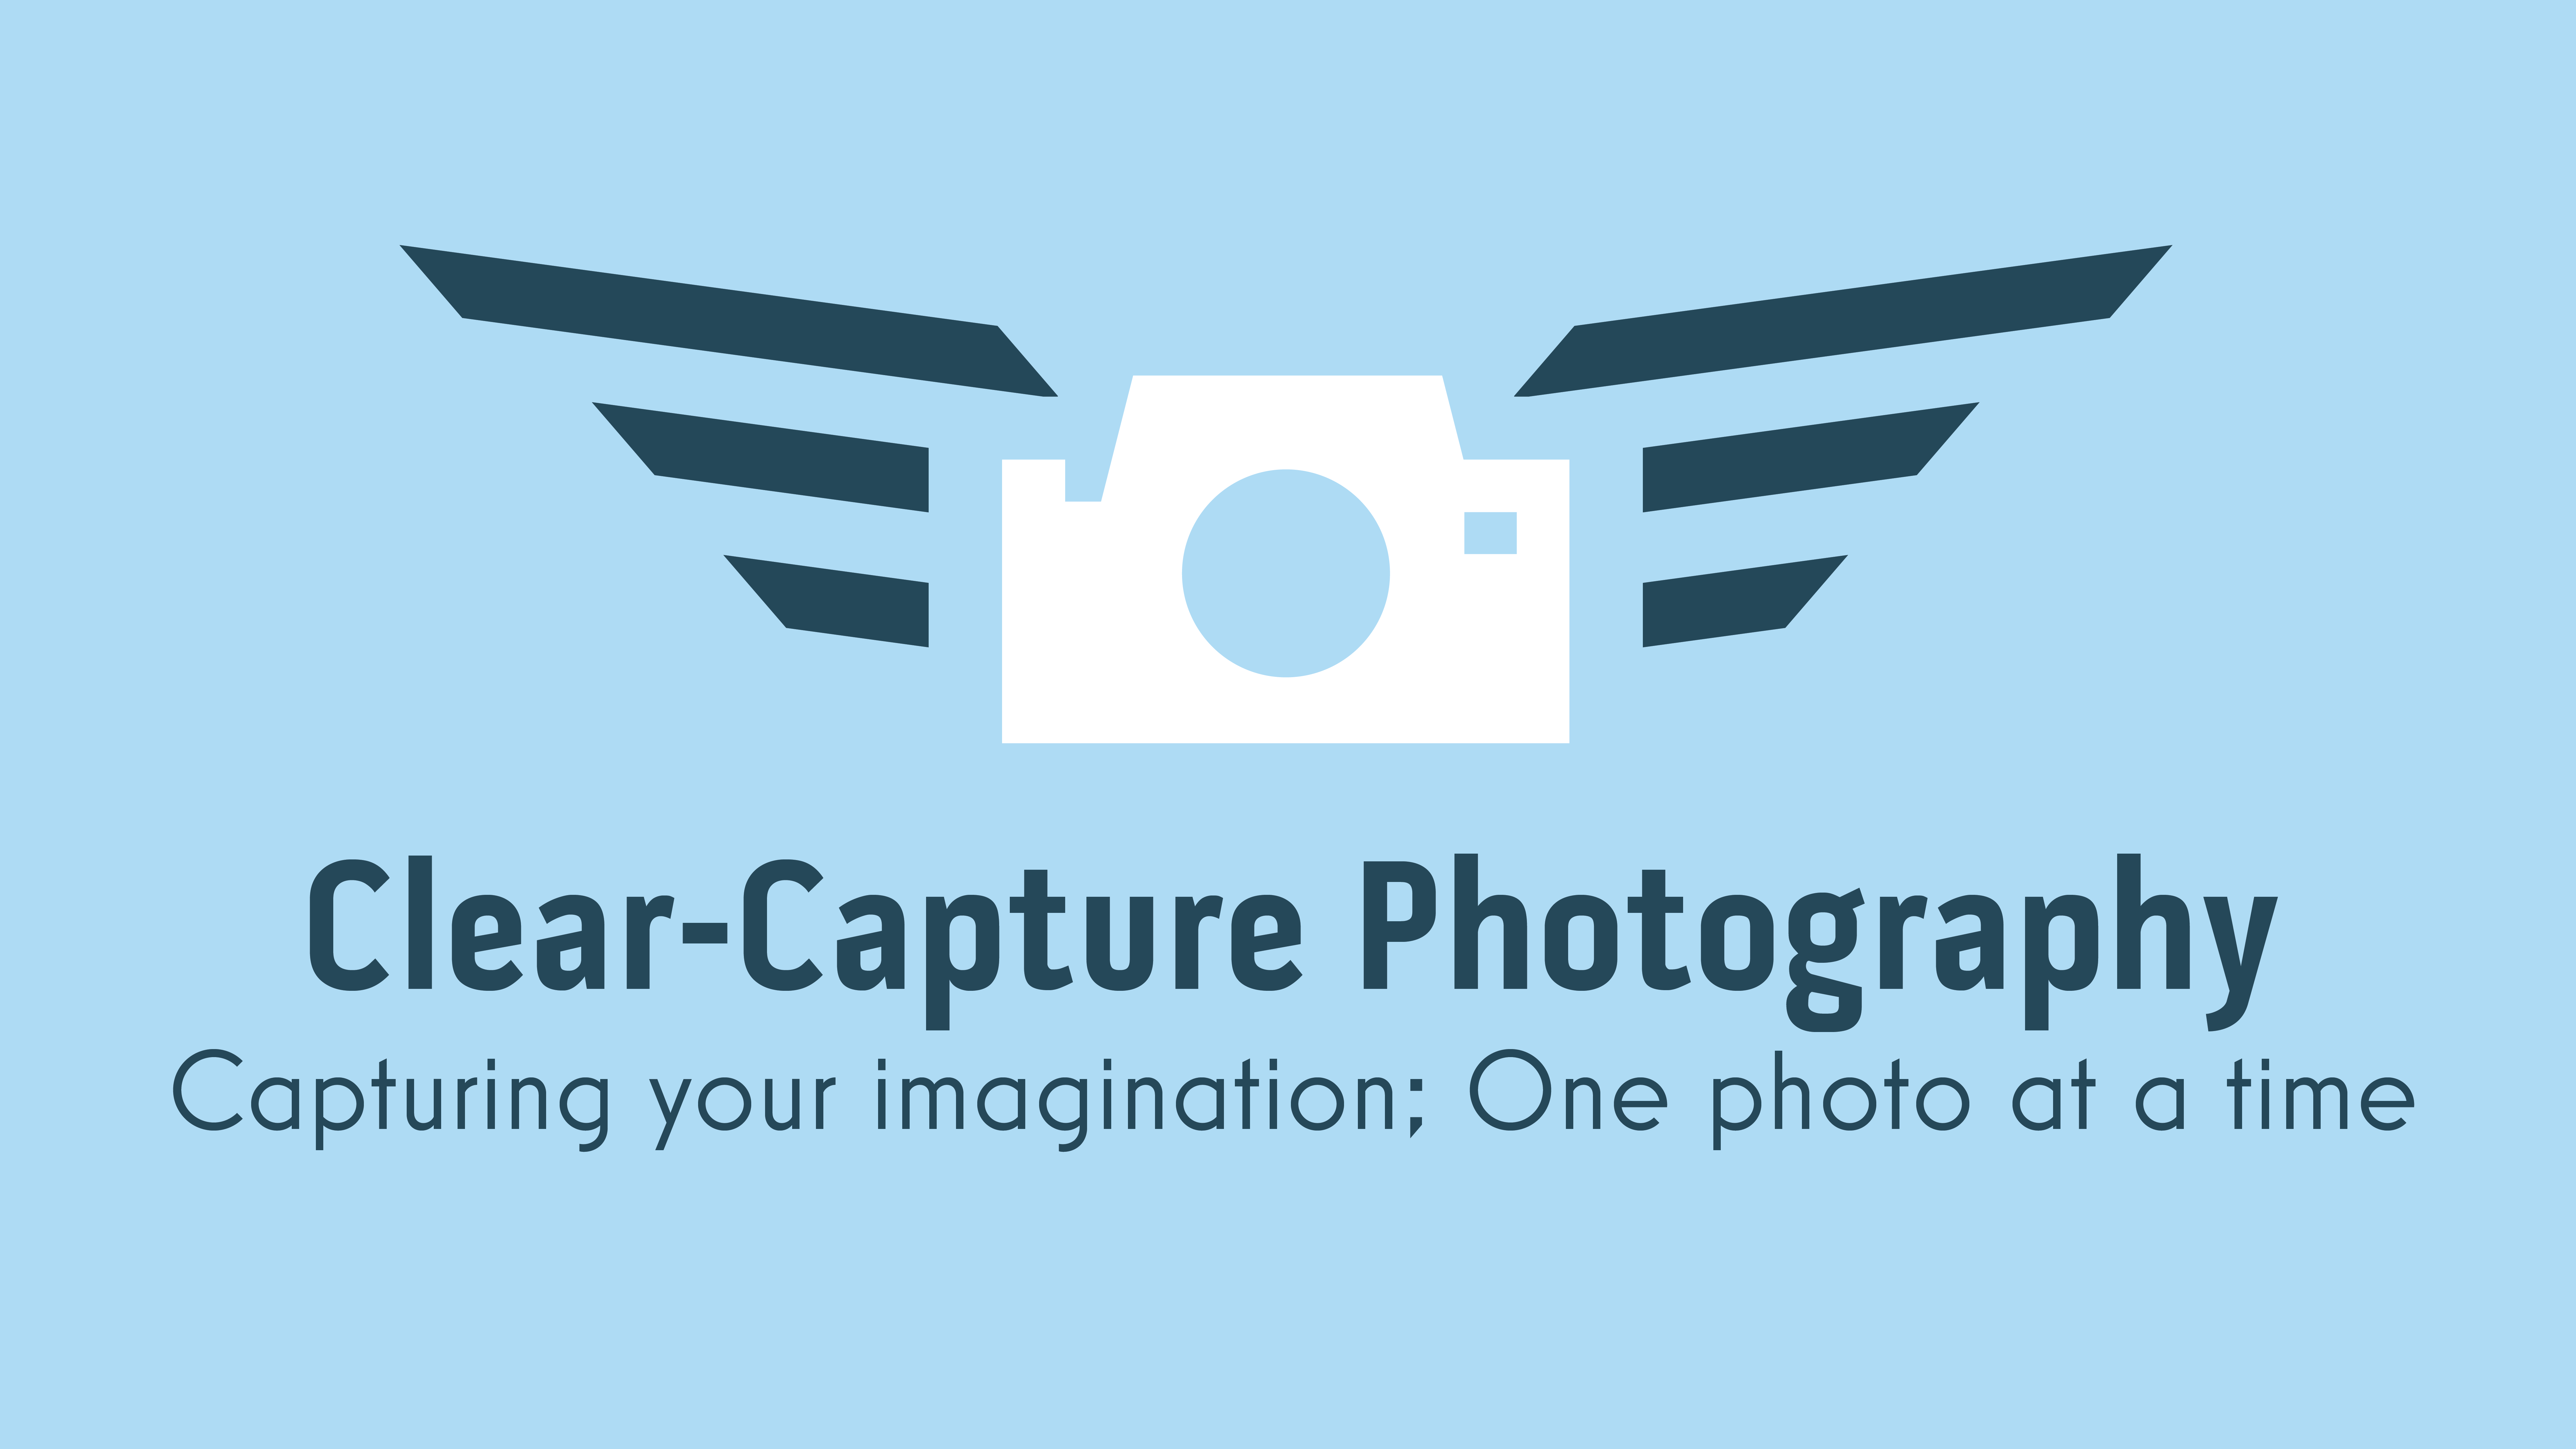 Clear-Capture Photography